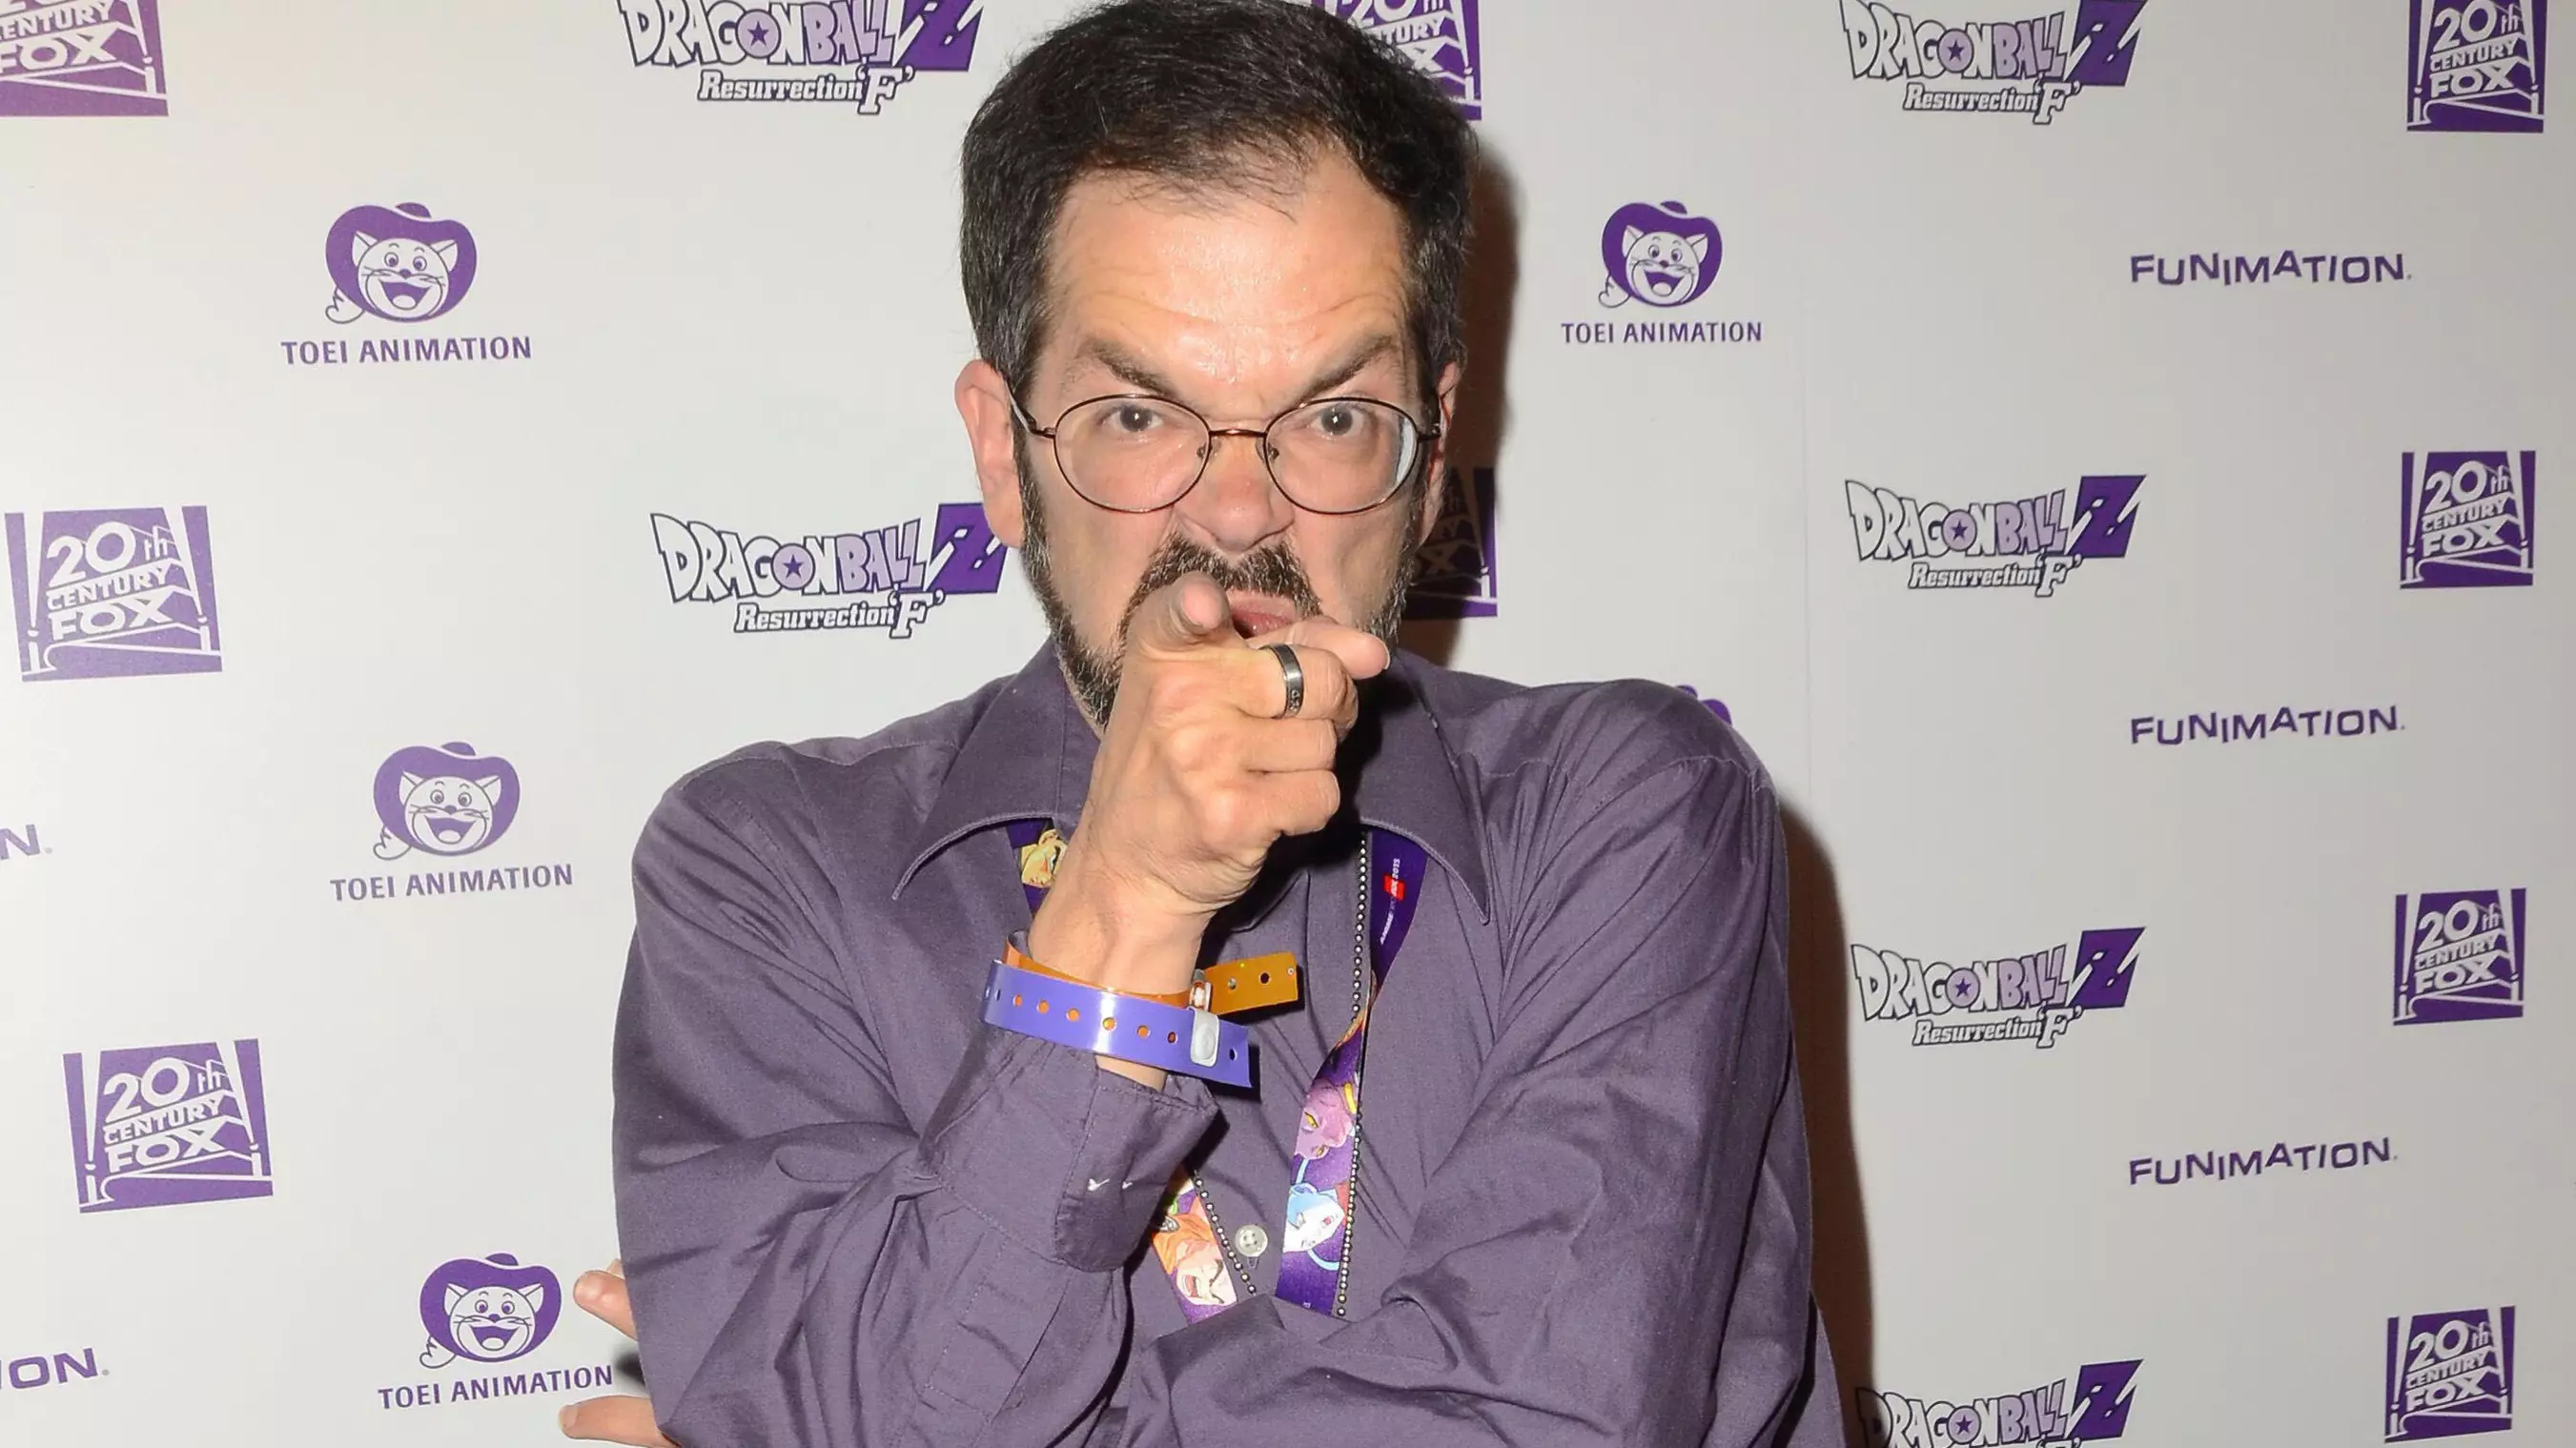 Christopher Ayres, Voice Actor Who Played Dragon Ball's Frieza, Dies at 56